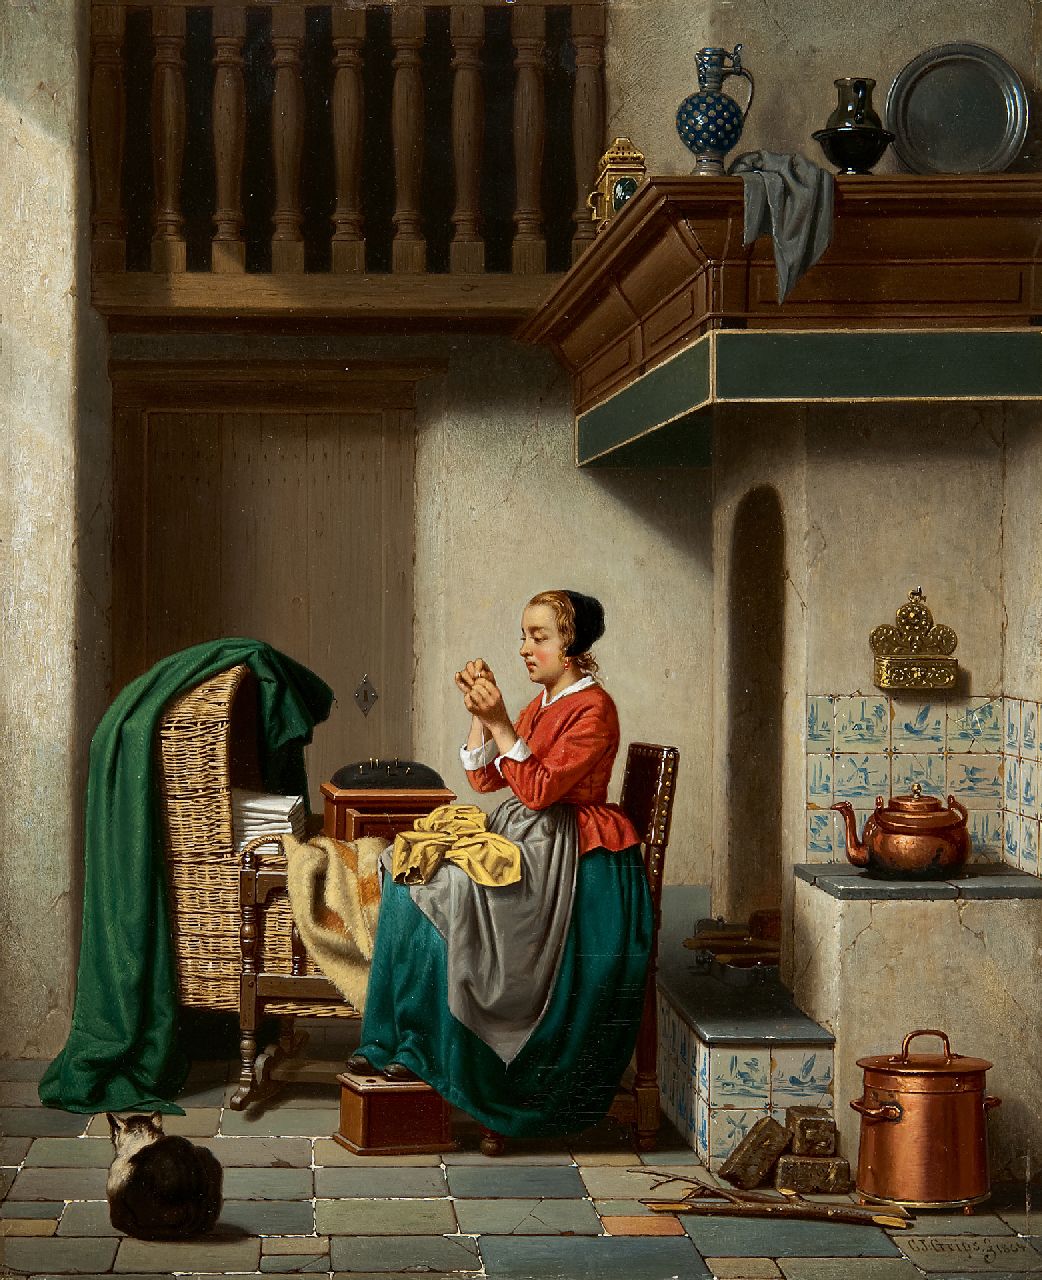 Grips C.J.  | Carel Jozeph Grips, Mending the garments, oil on panel 36.0 x 29.3 cm, signed l.r. and dated 1864